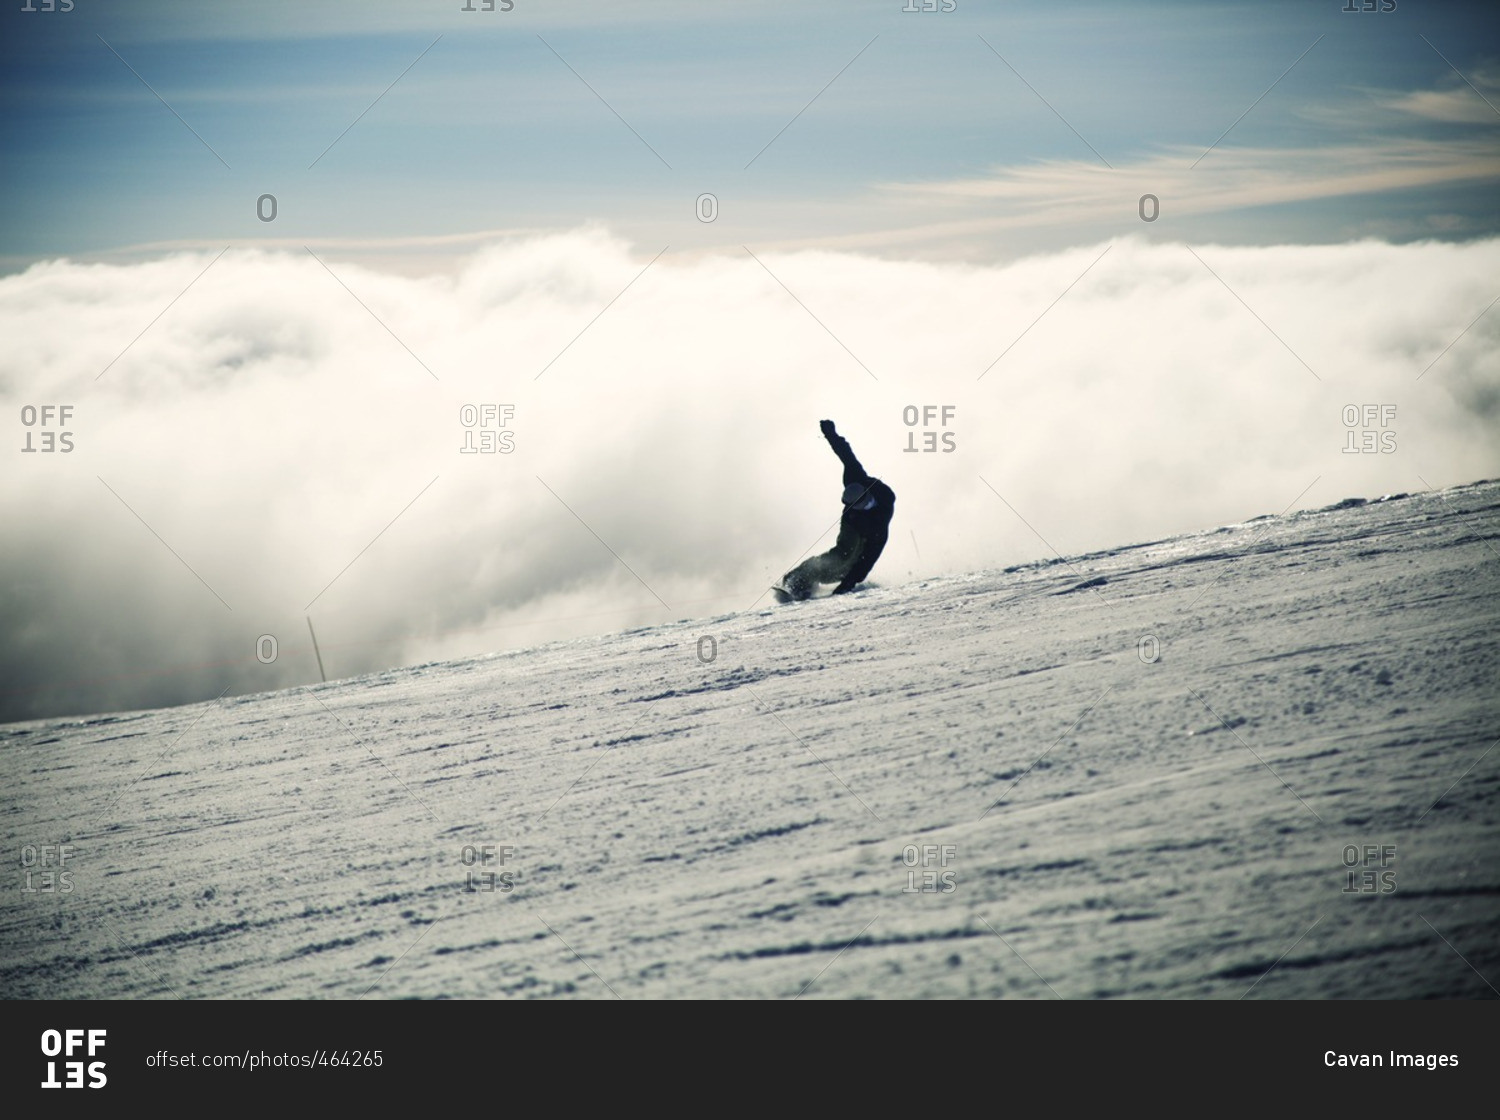 Man snowboarding on snowy landscape during foggy weather